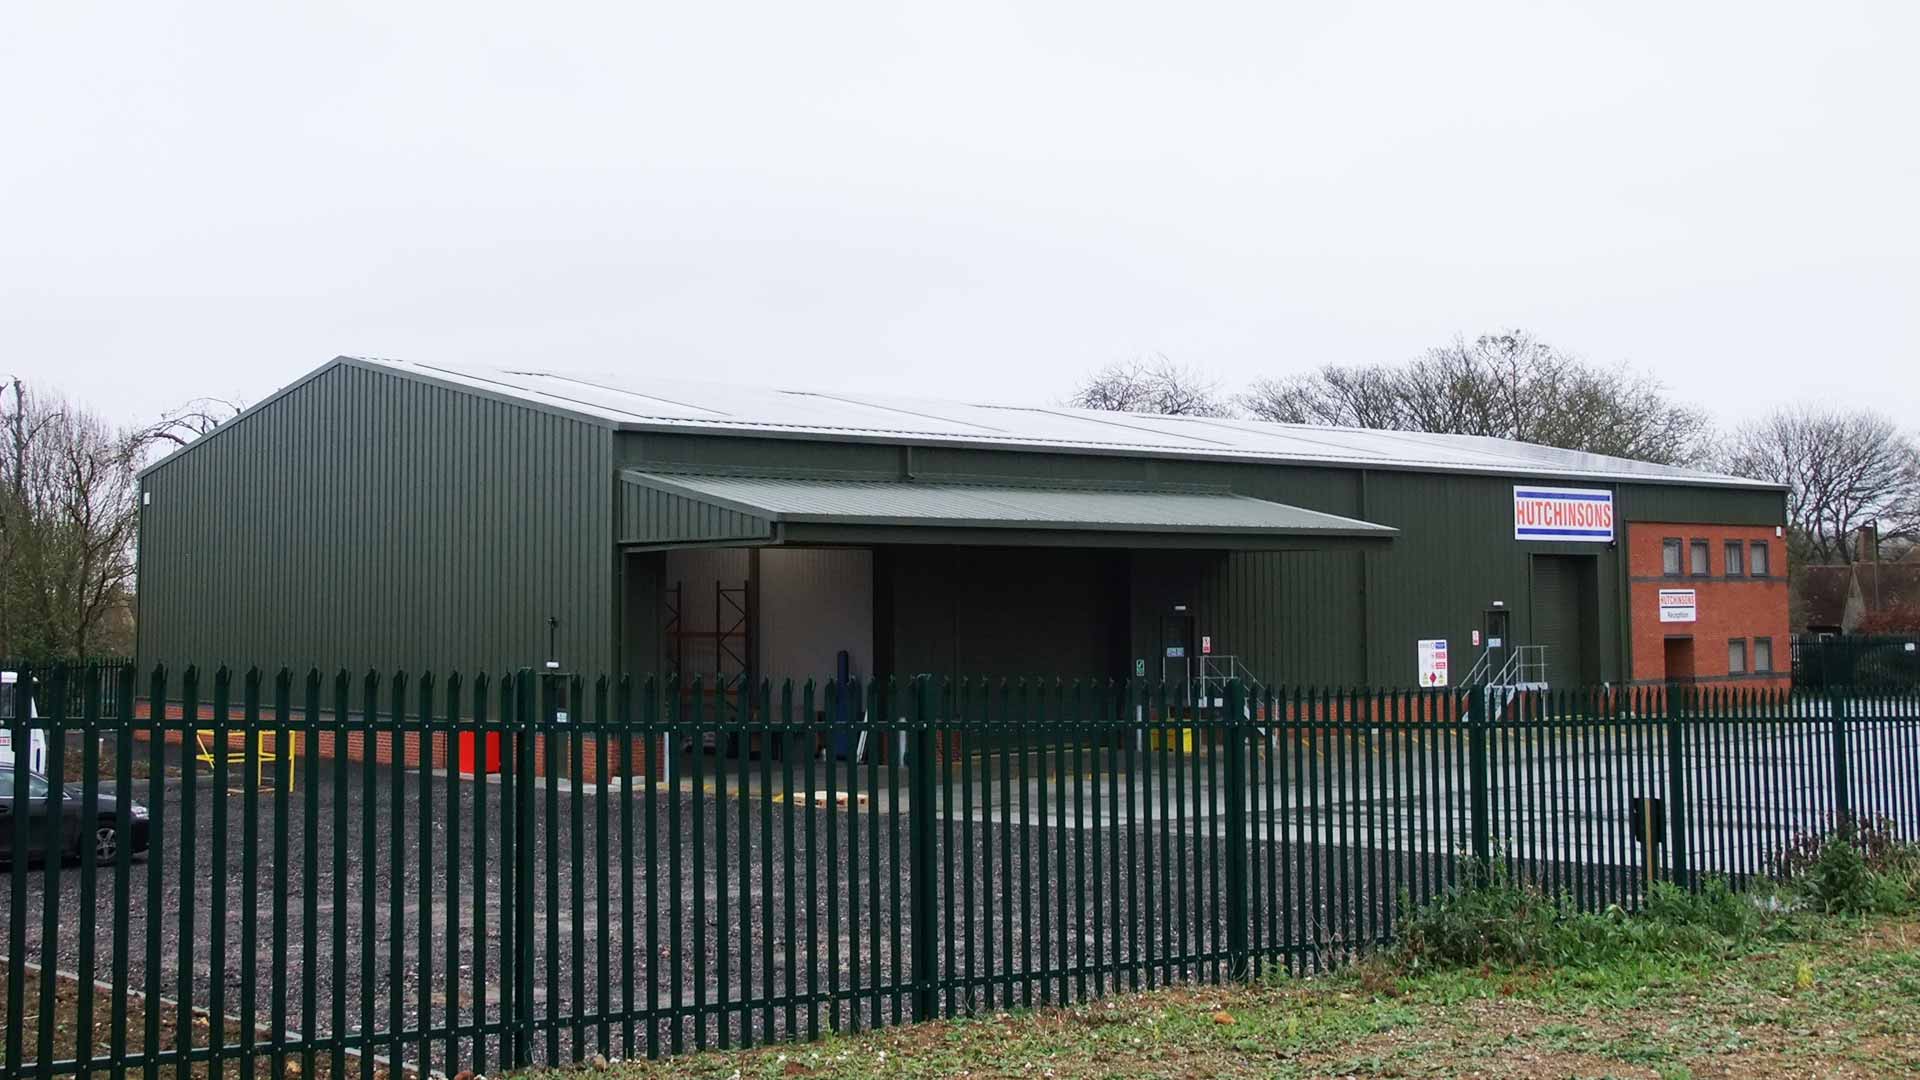 Exterior of Hutchinsons Distribution steel frame building and yard in Canterbury.